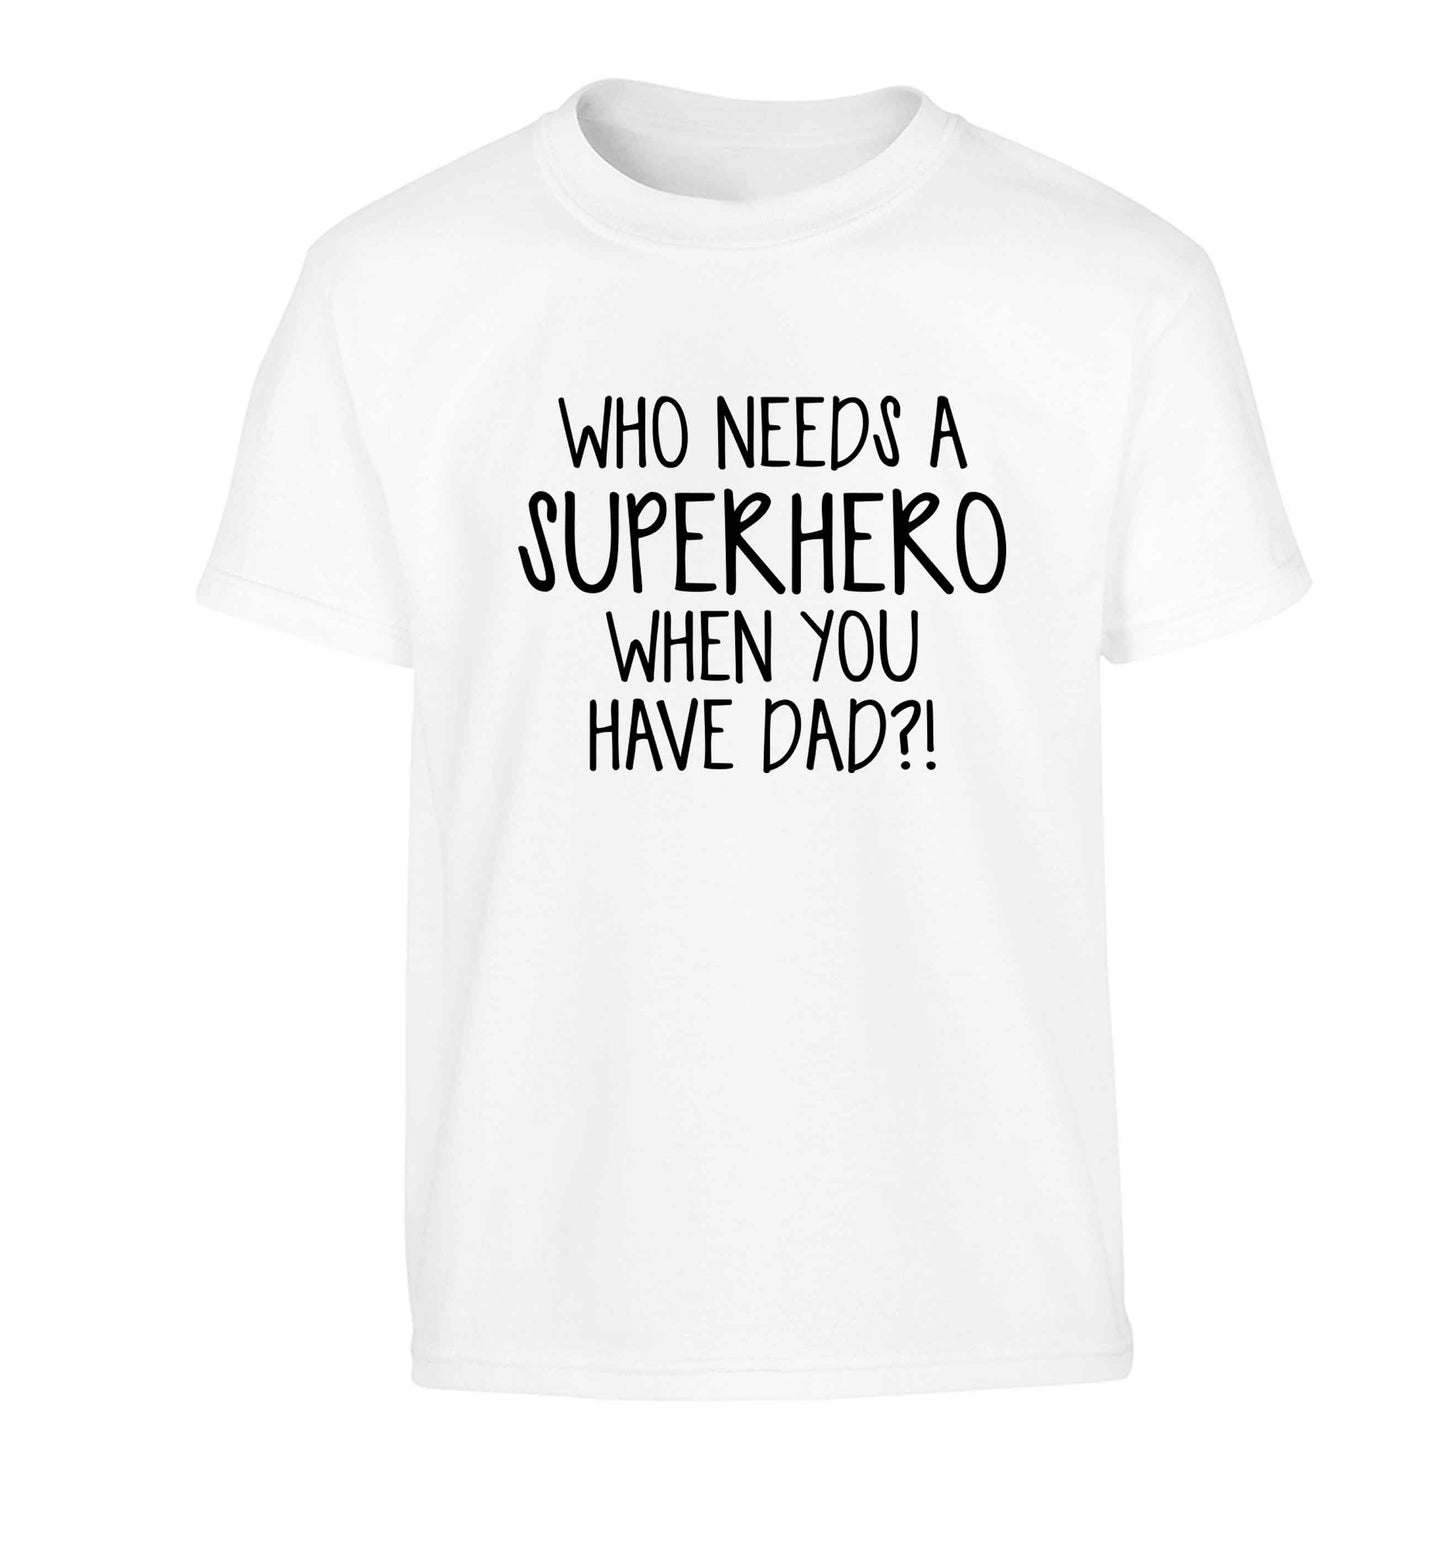 Who needs a superhero when you have dad! Children's white Tshirt 12-13 Years